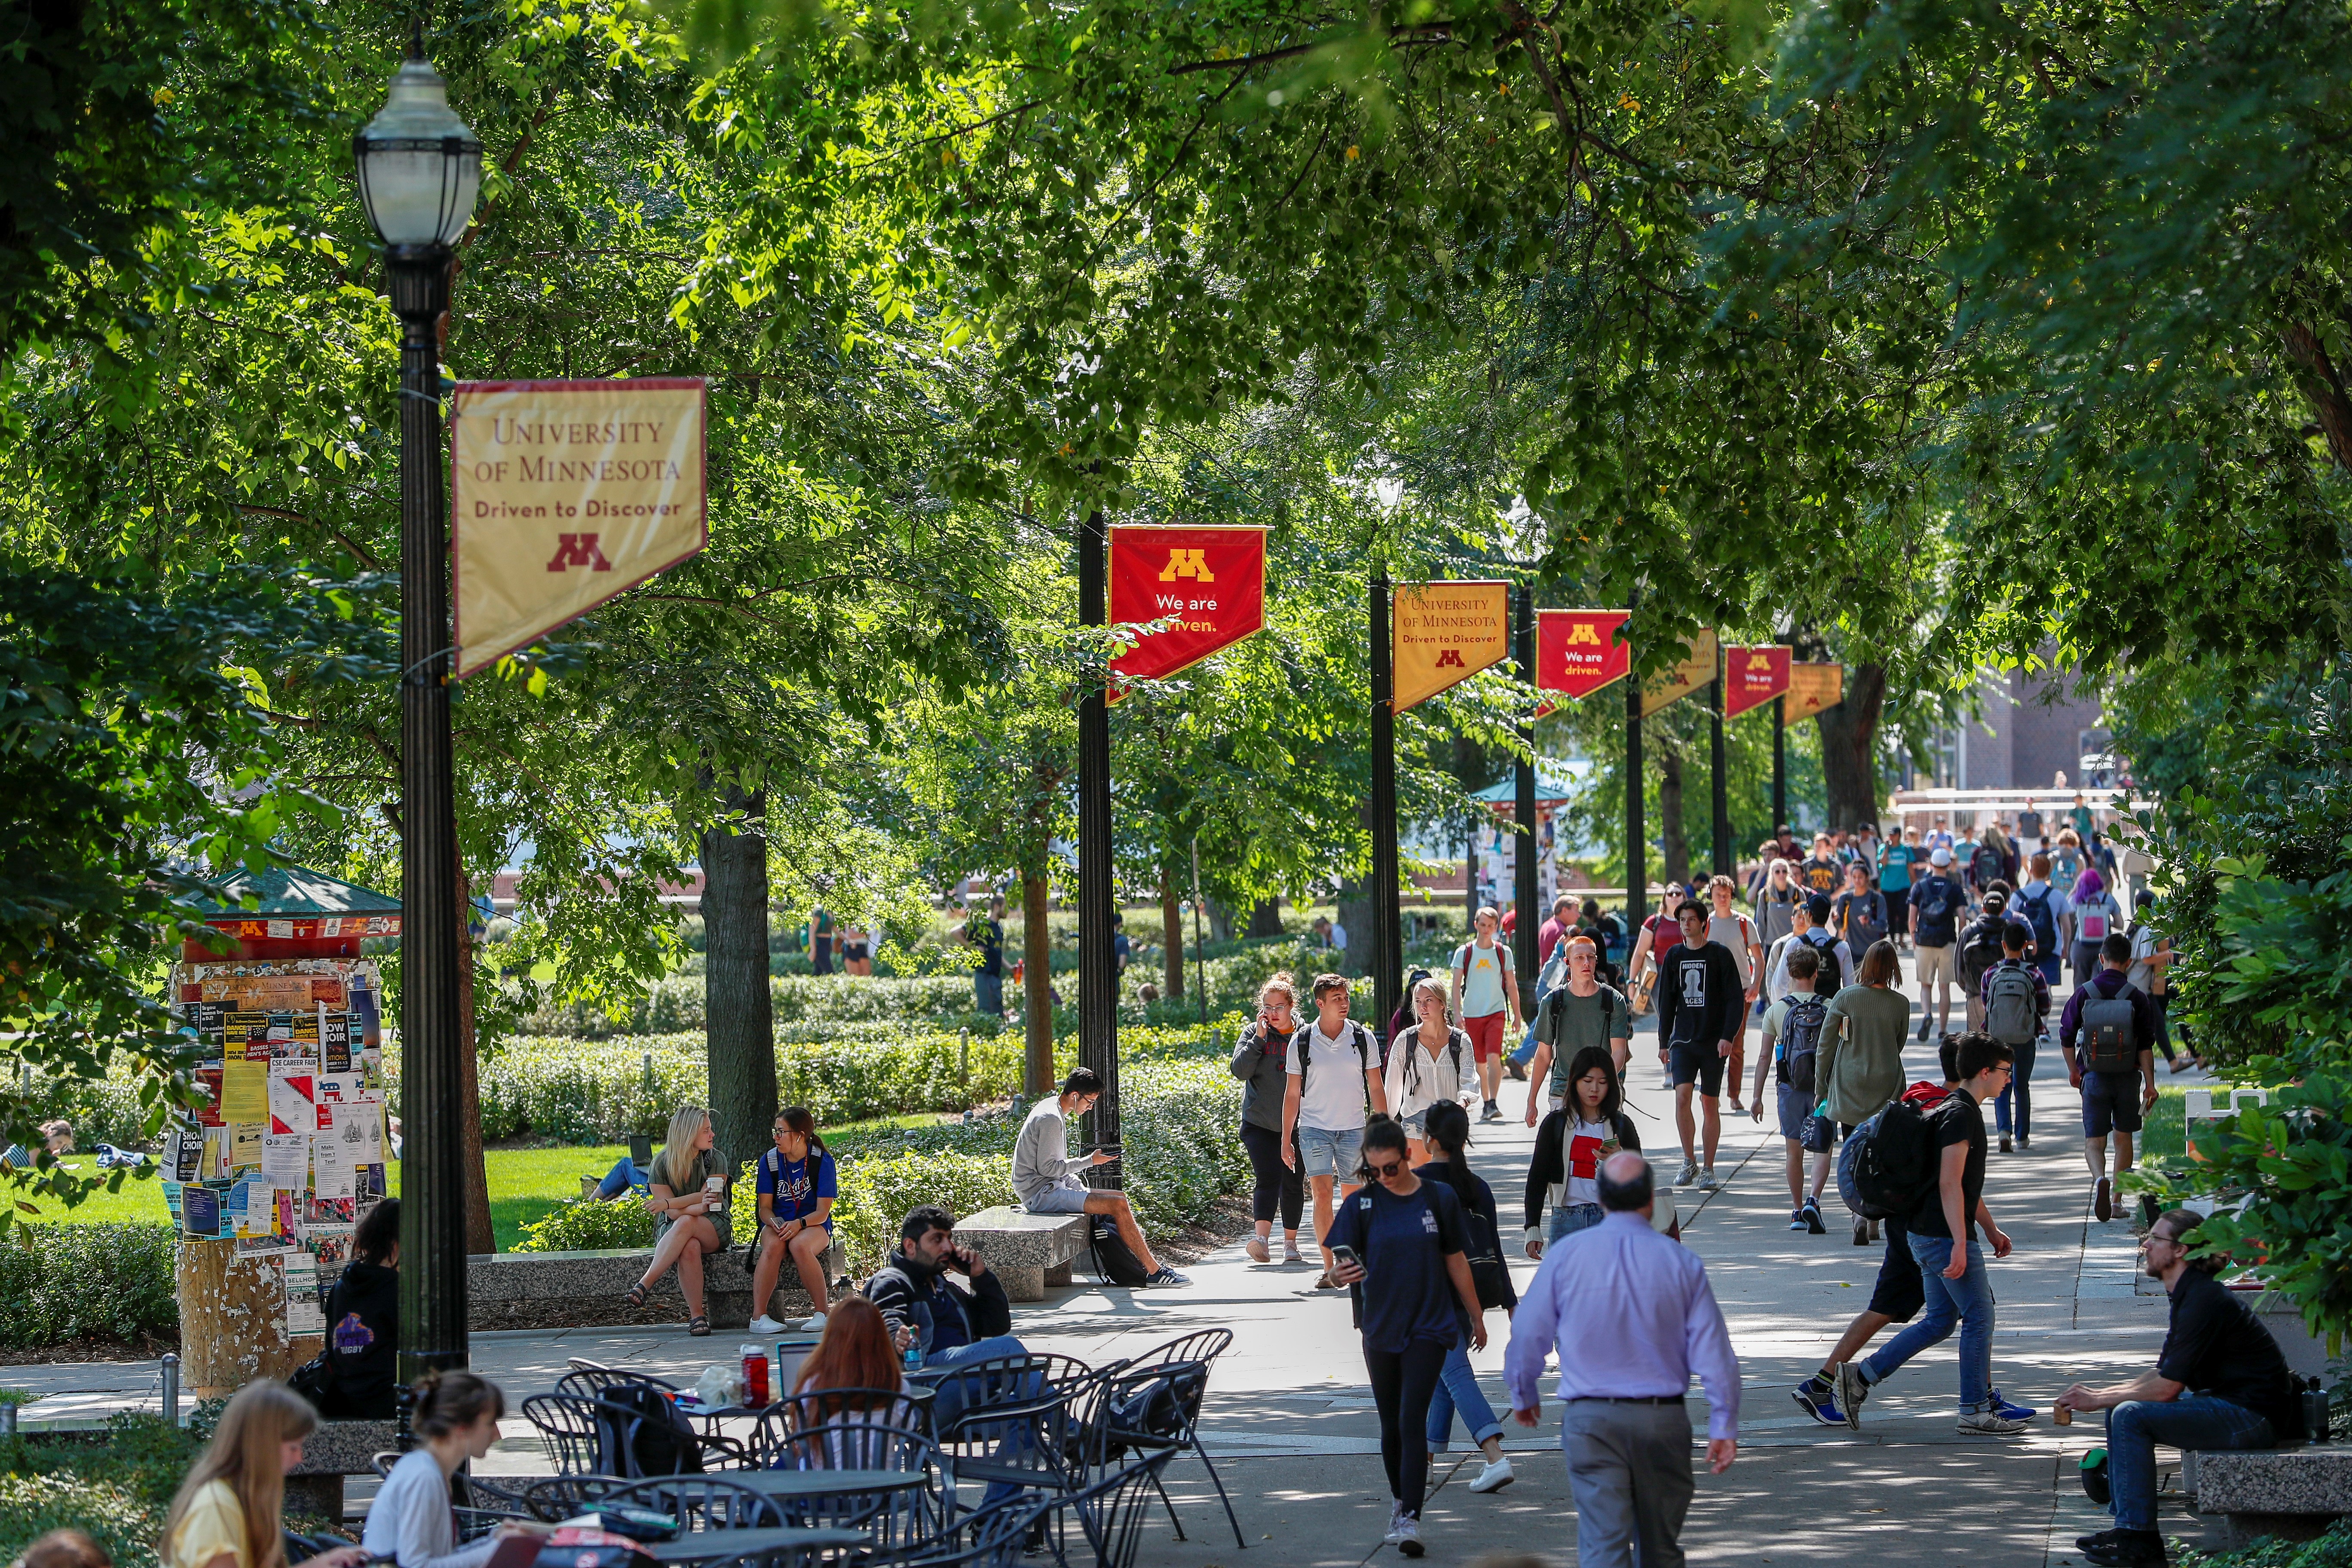 Photo of students walking on a sidewalk lined by tall, leafy trees on the University of Minnesota Twin Cities campus.